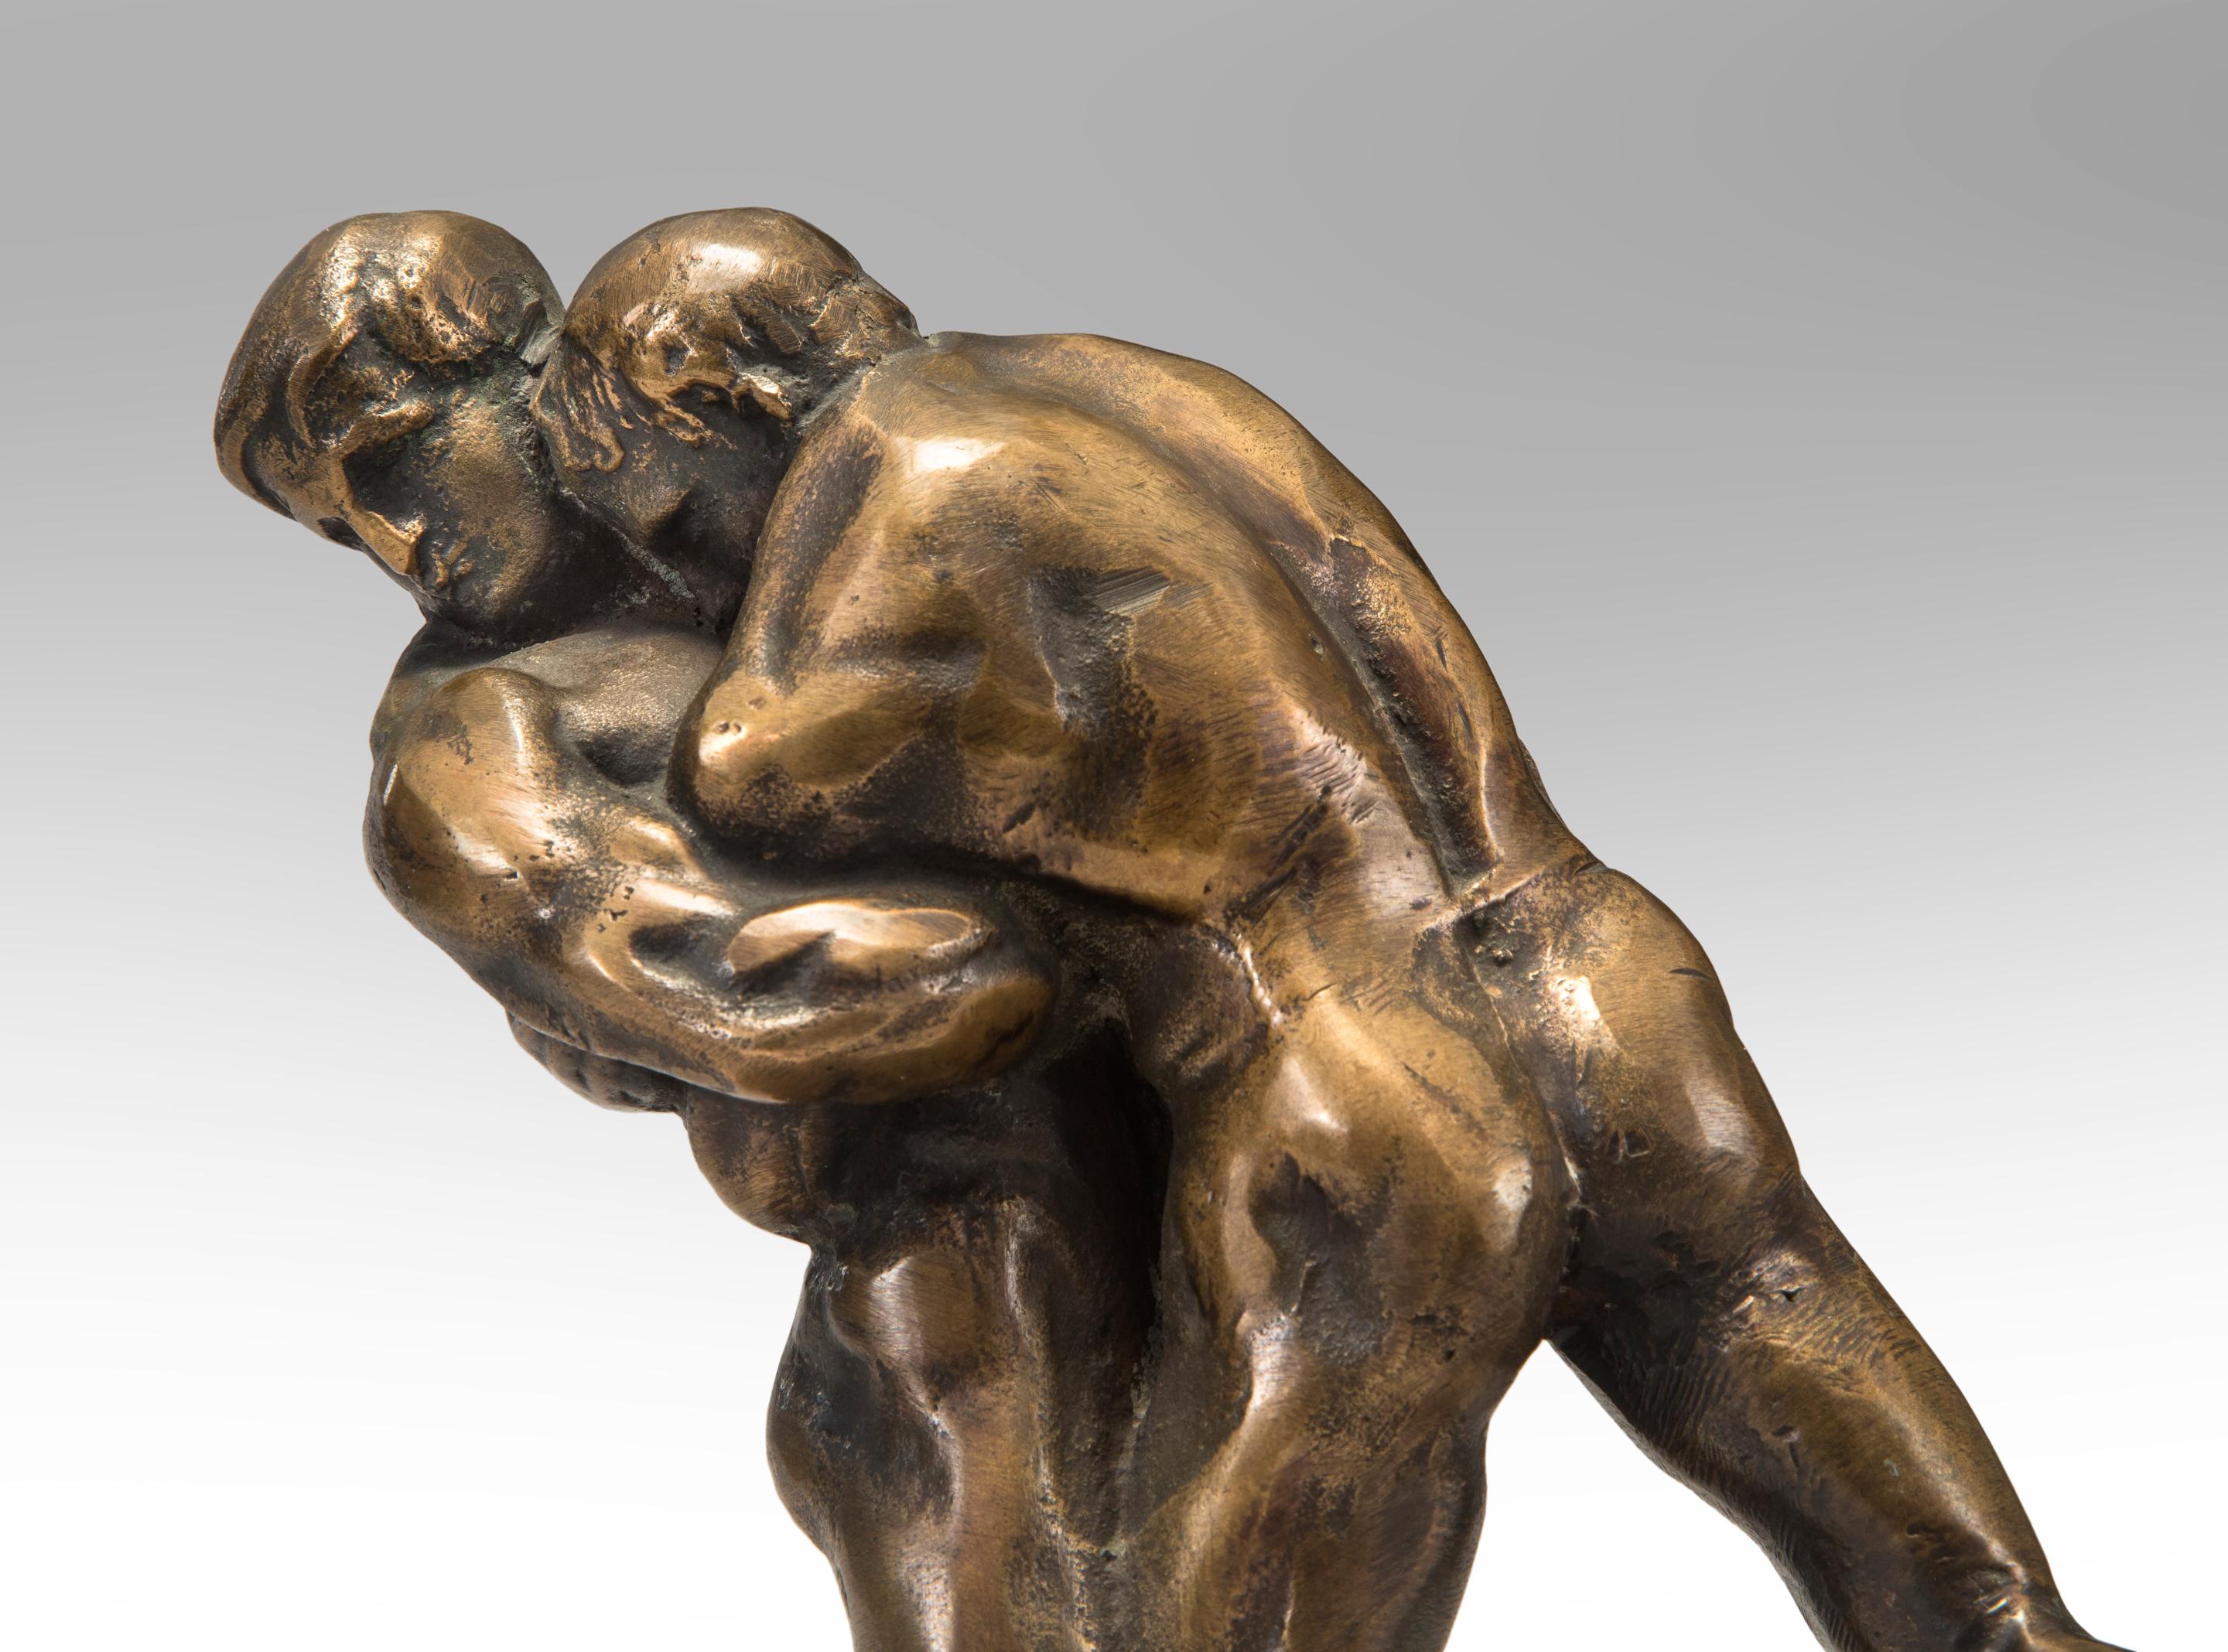 Okänd Konstnär, Swedish patinated bronze sculpture of Wrestlers
early 20th century
Depicting two male wrestlers locked in combat. The richly patinated bronze highlighted by contrasting tonalities.